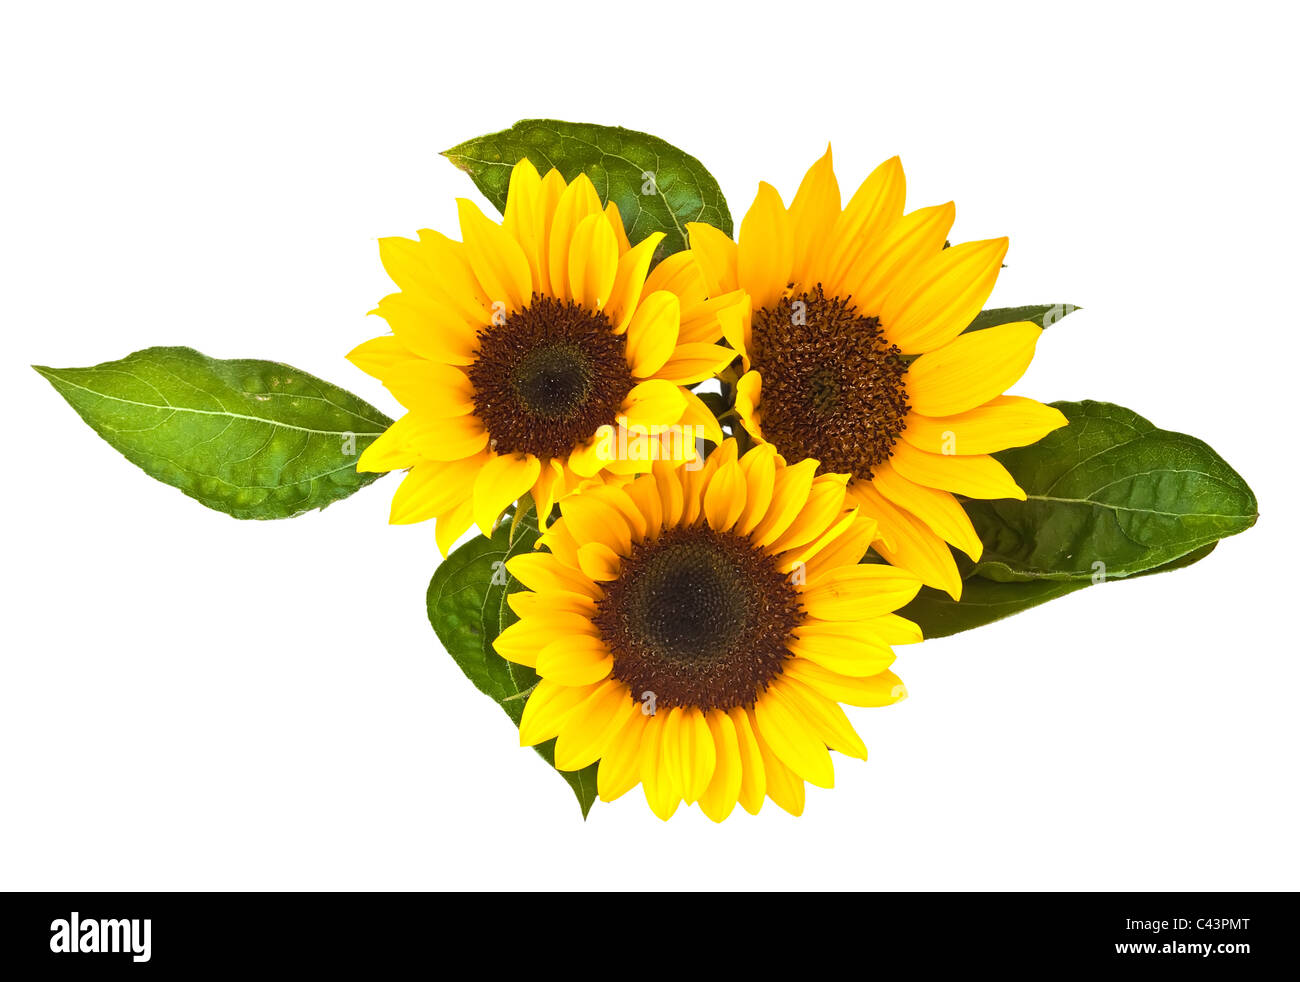 Pollination of a sunflower Cut Out Stock Images & Pictures - Alamy